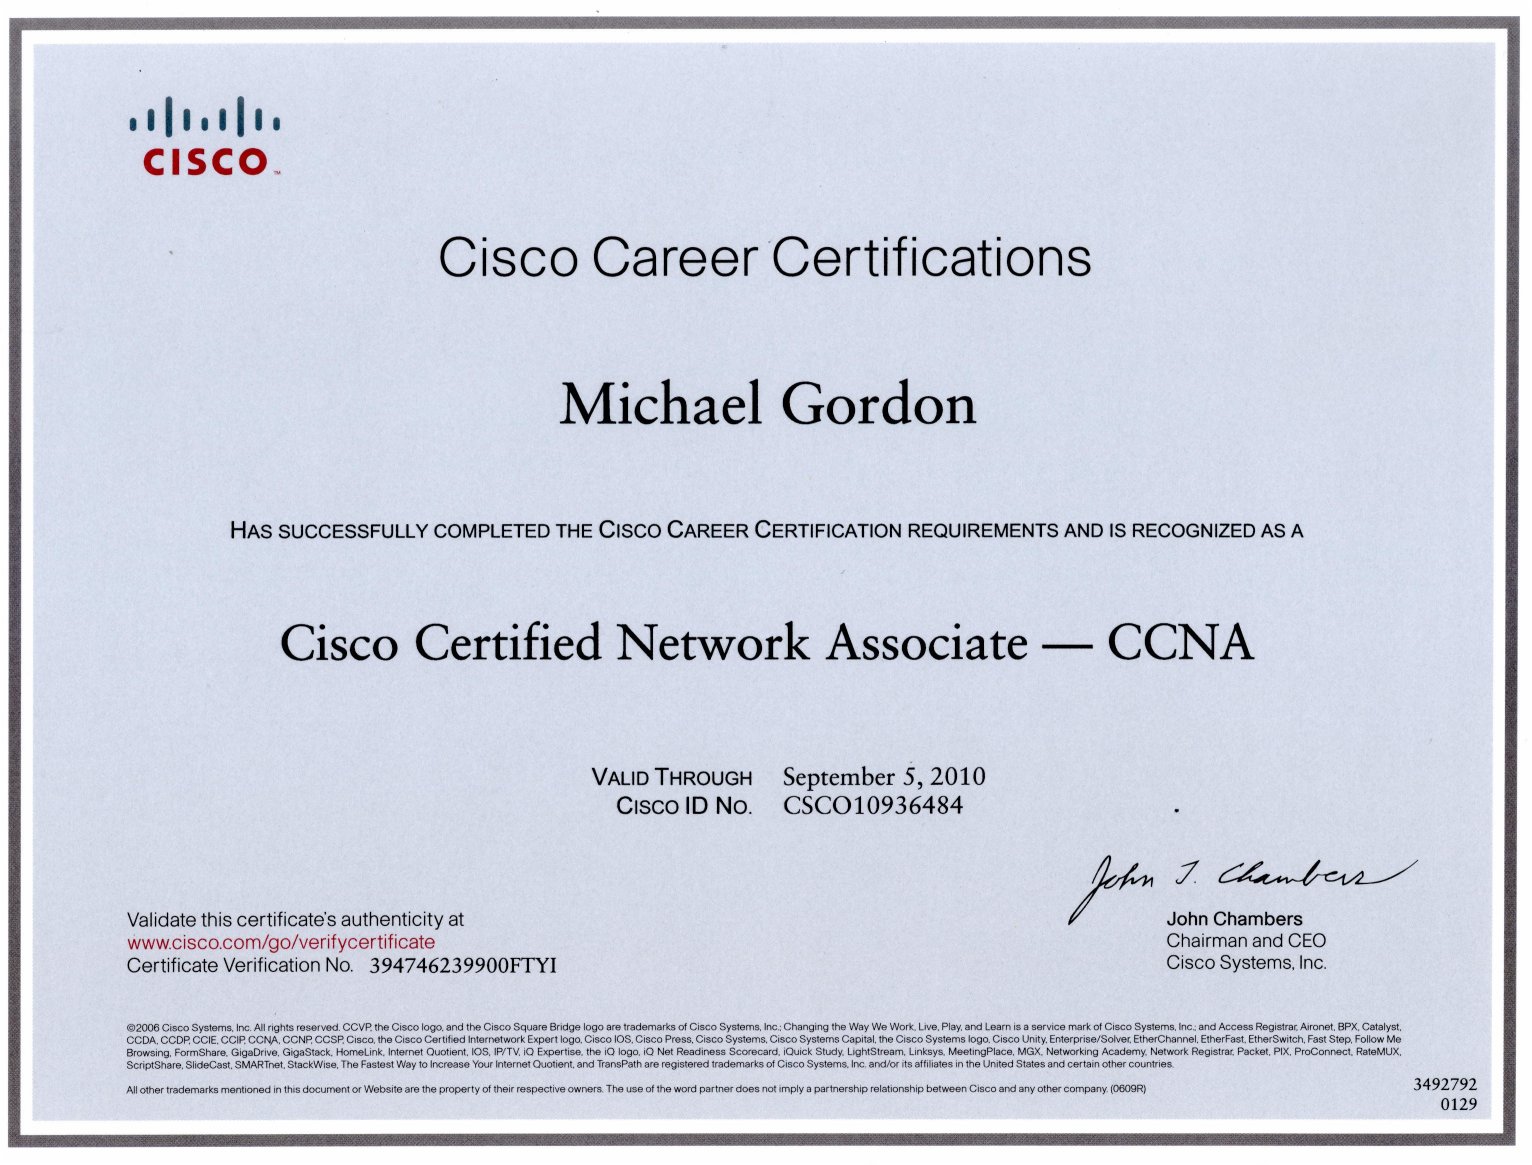 Resume for ccna trainer